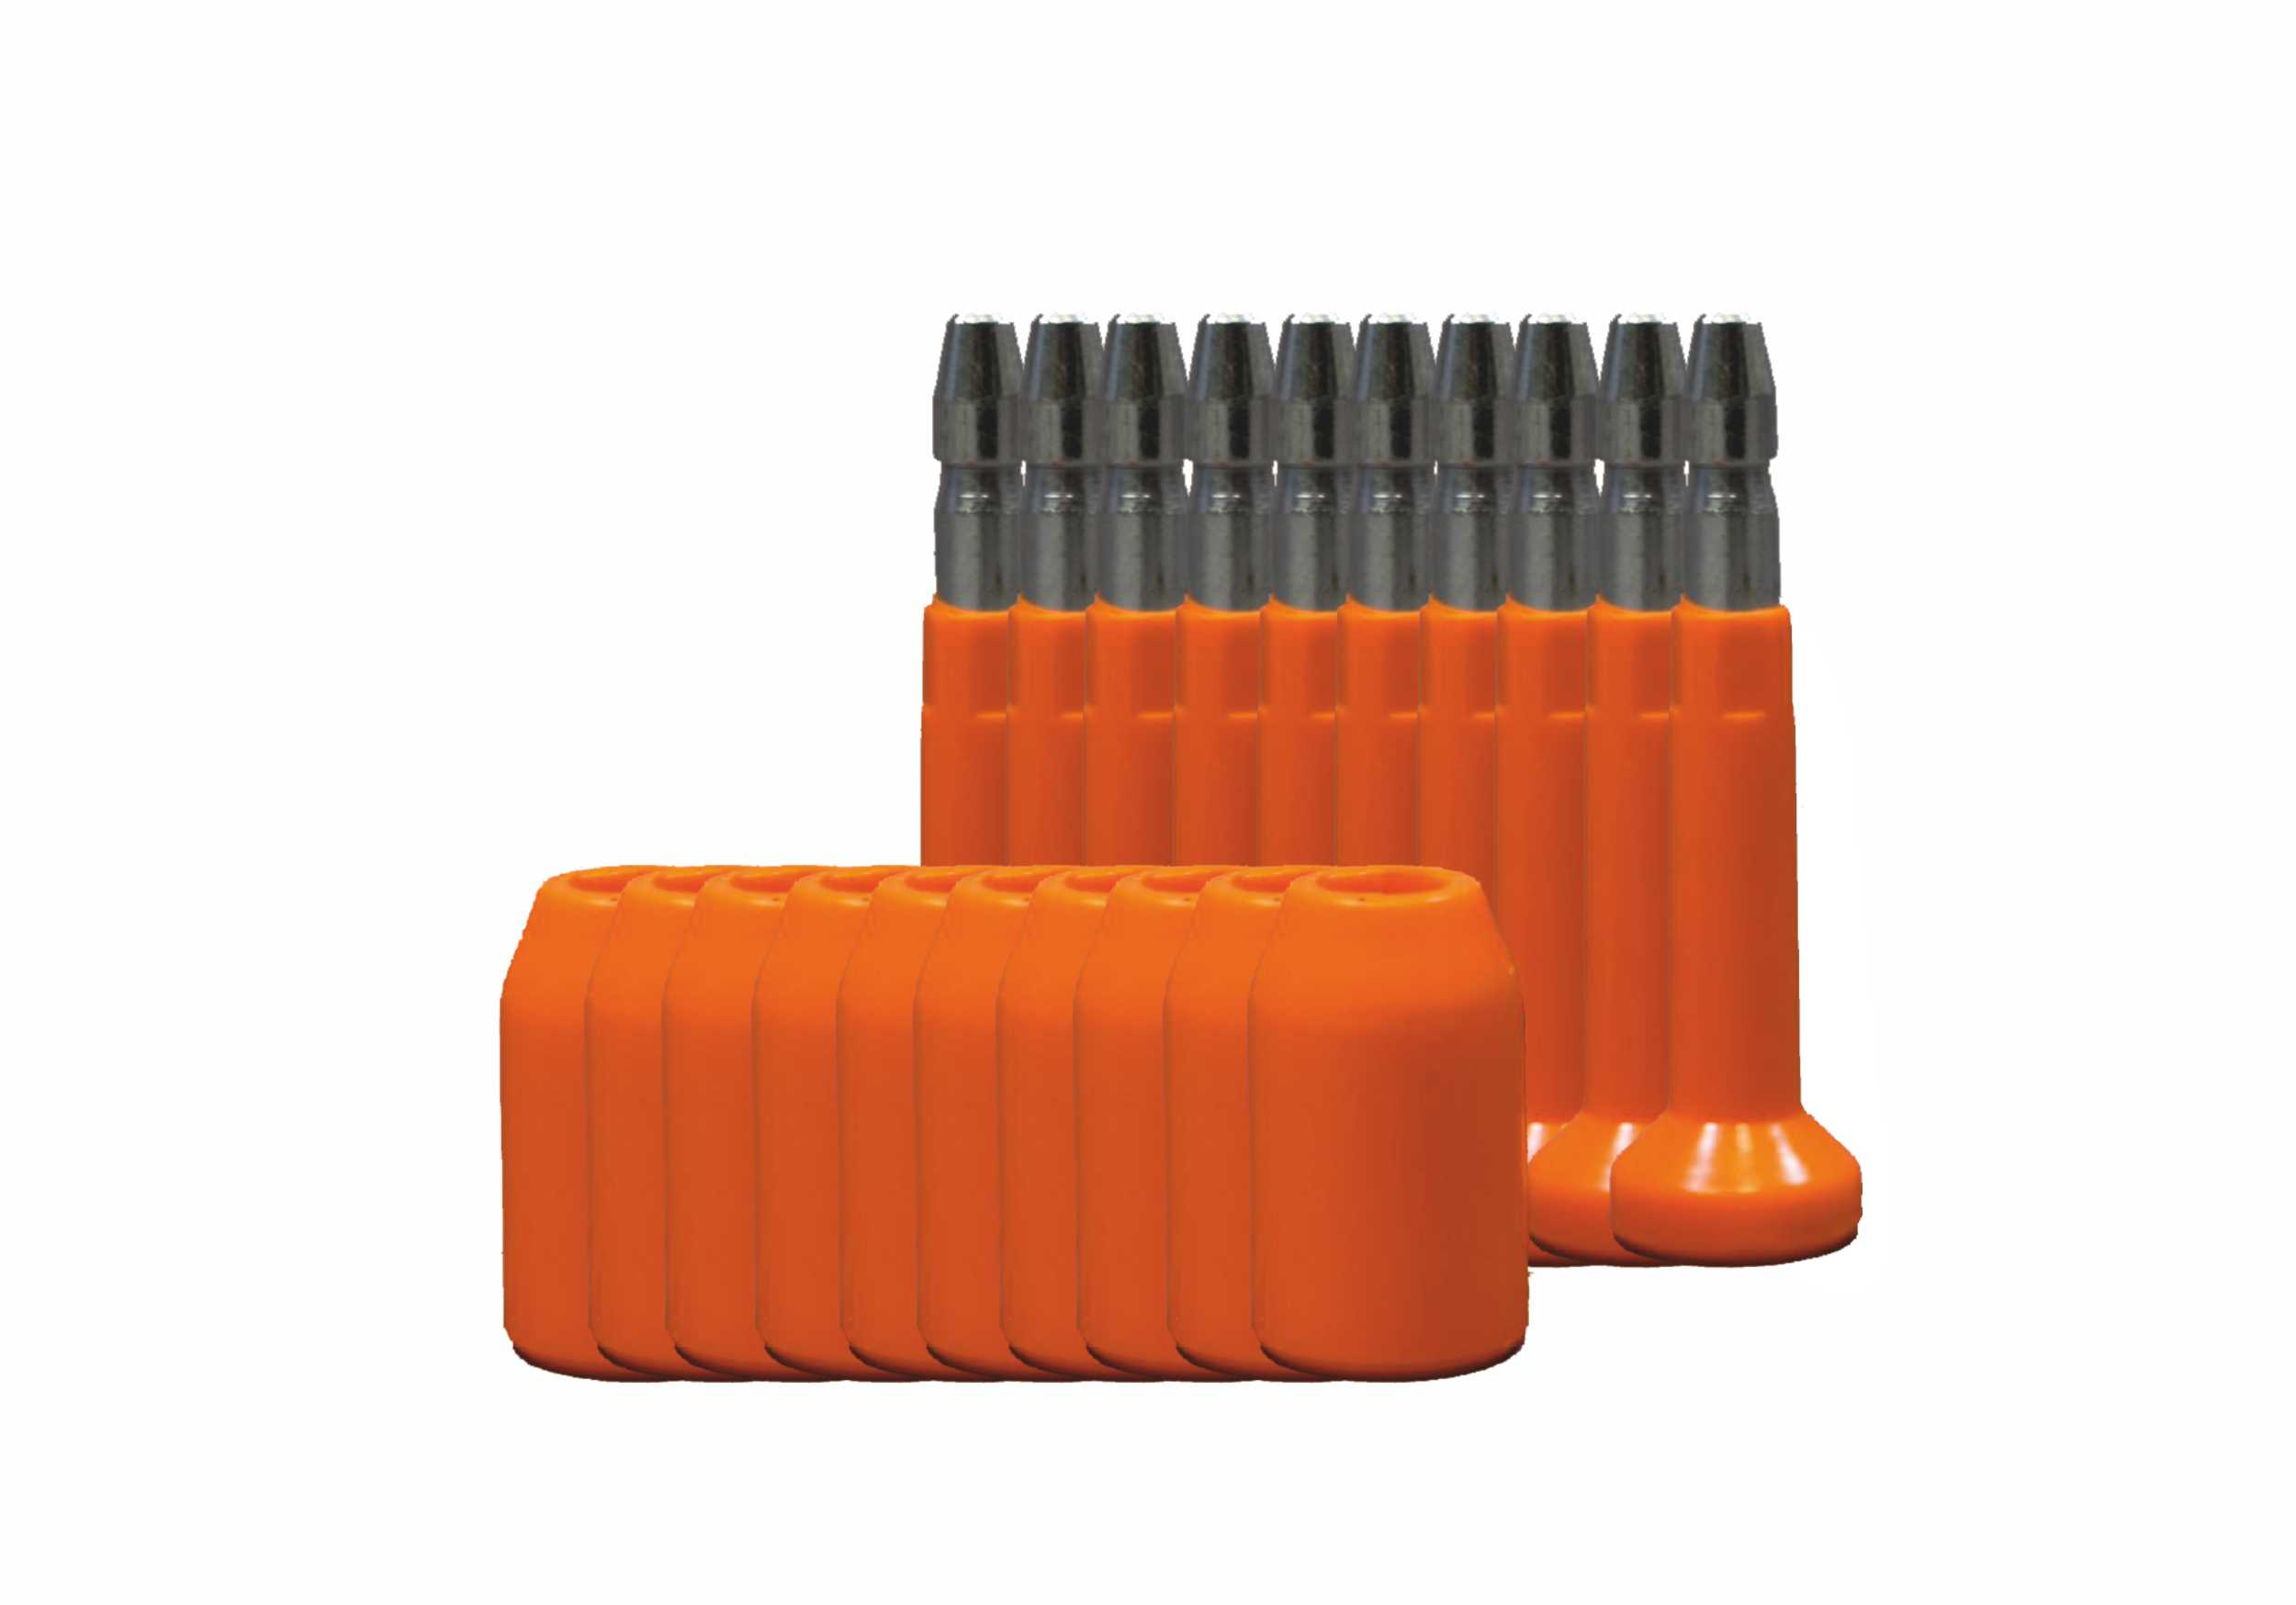 container_seal_orange_10s_set_load_security_anti_theft_rothschenk_shop